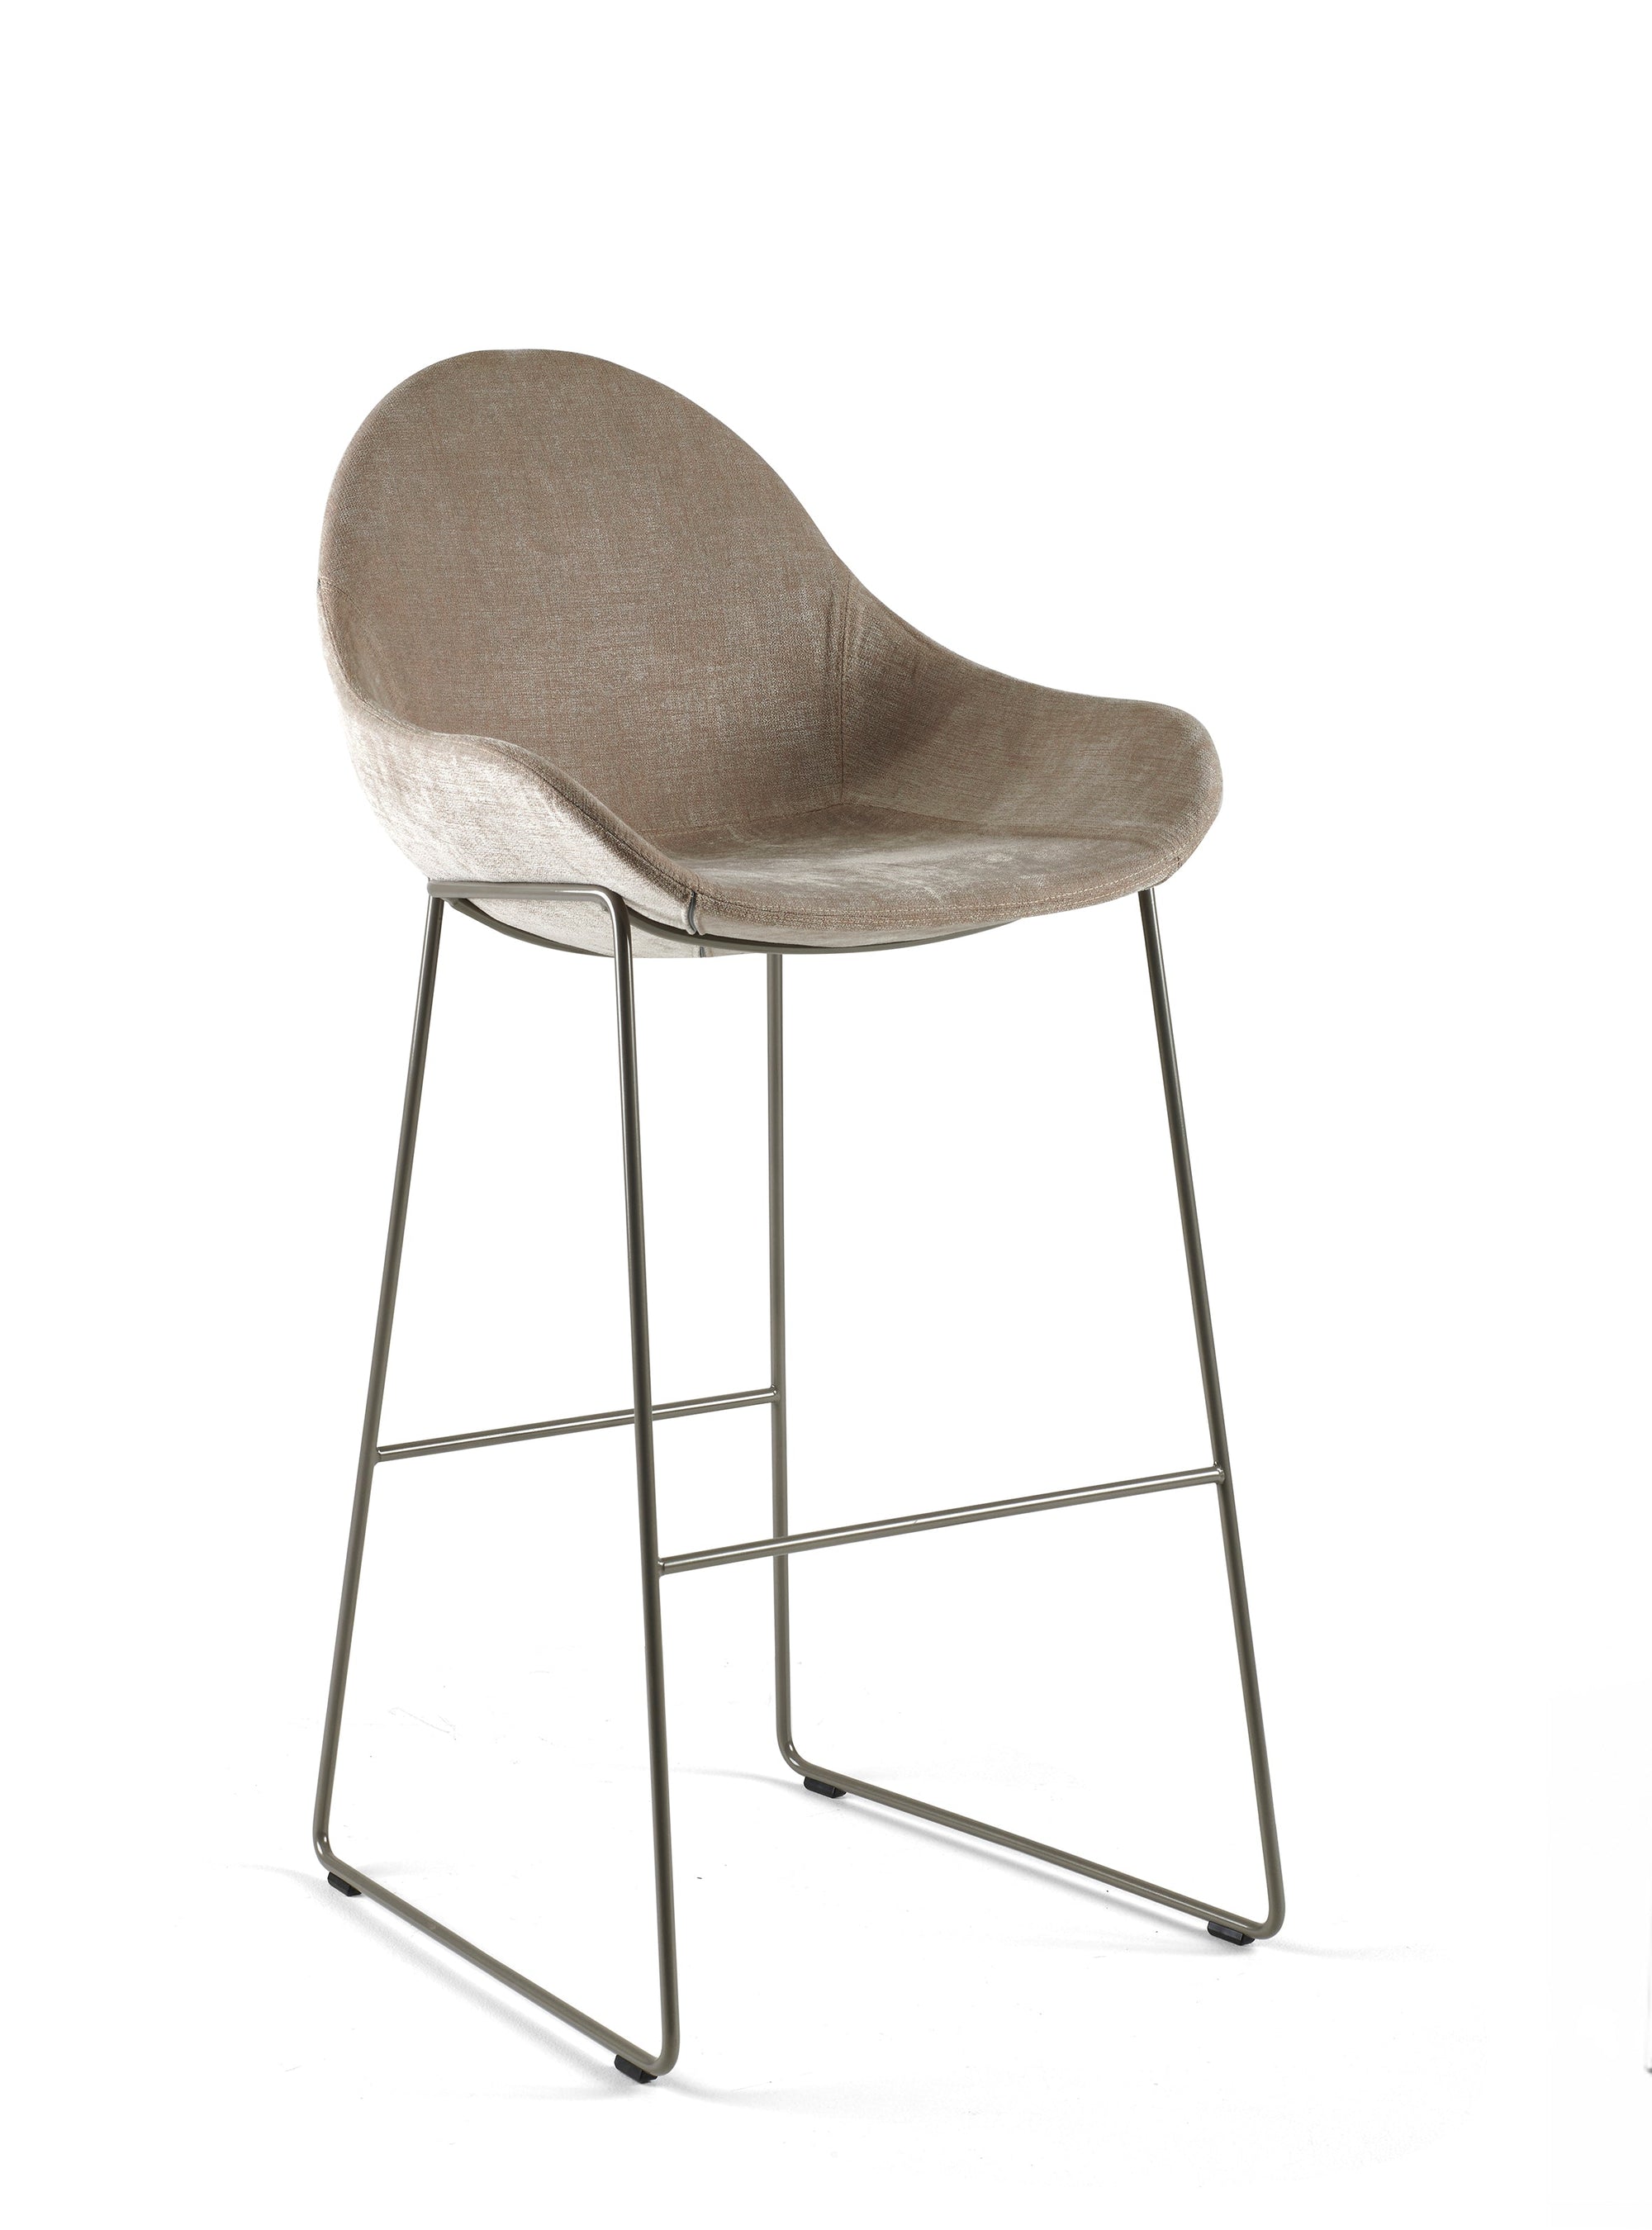 Atticus With Arms 09 High Stool-Johanson Design-Contract Furniture Store